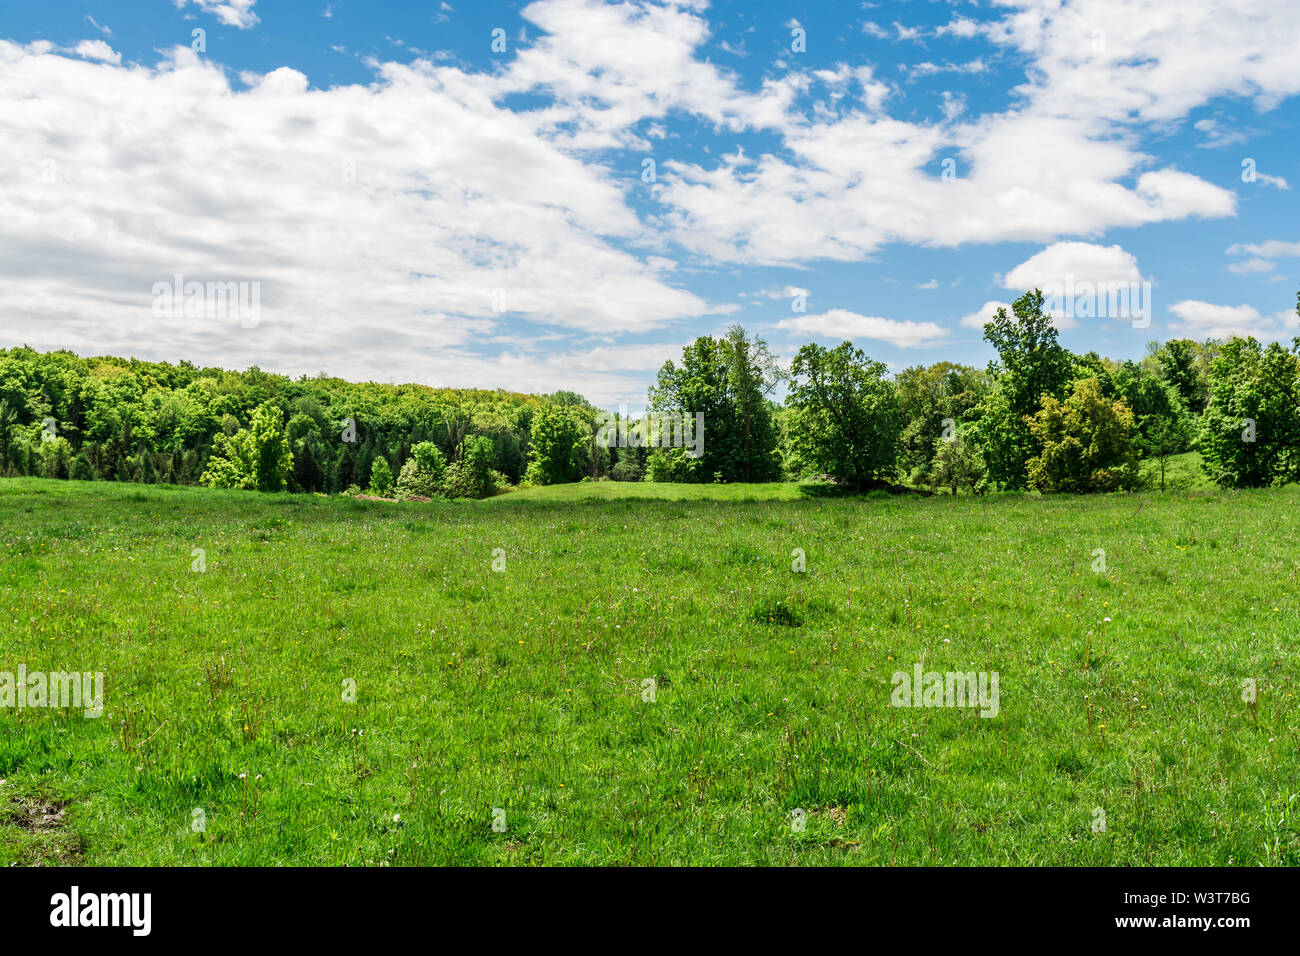 Nature preserve area showing green grass field with green trees on a hot summer sunny day with blue sky and white clouds Stock Photo